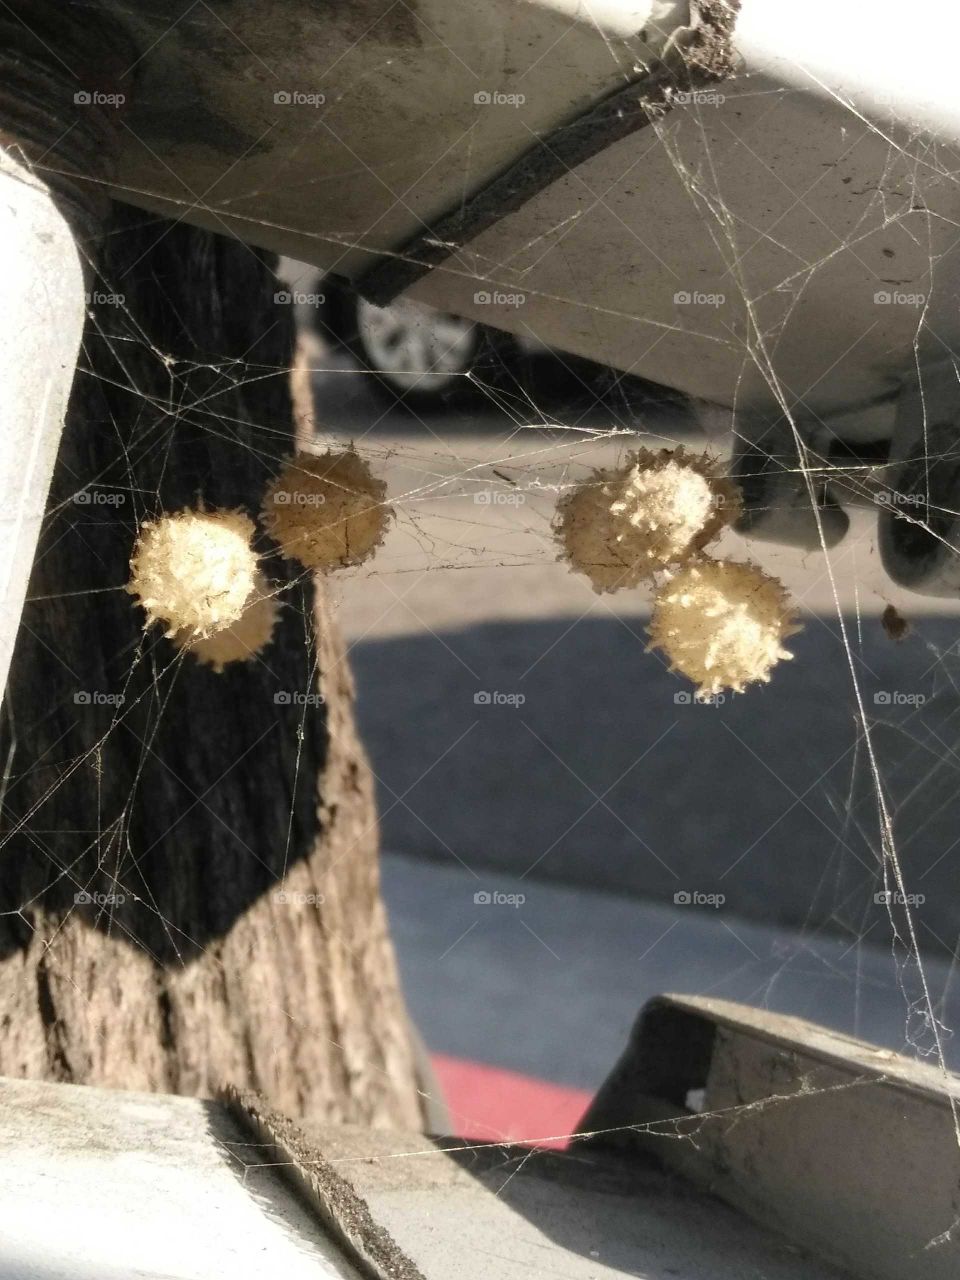 Spider Eggs in the City